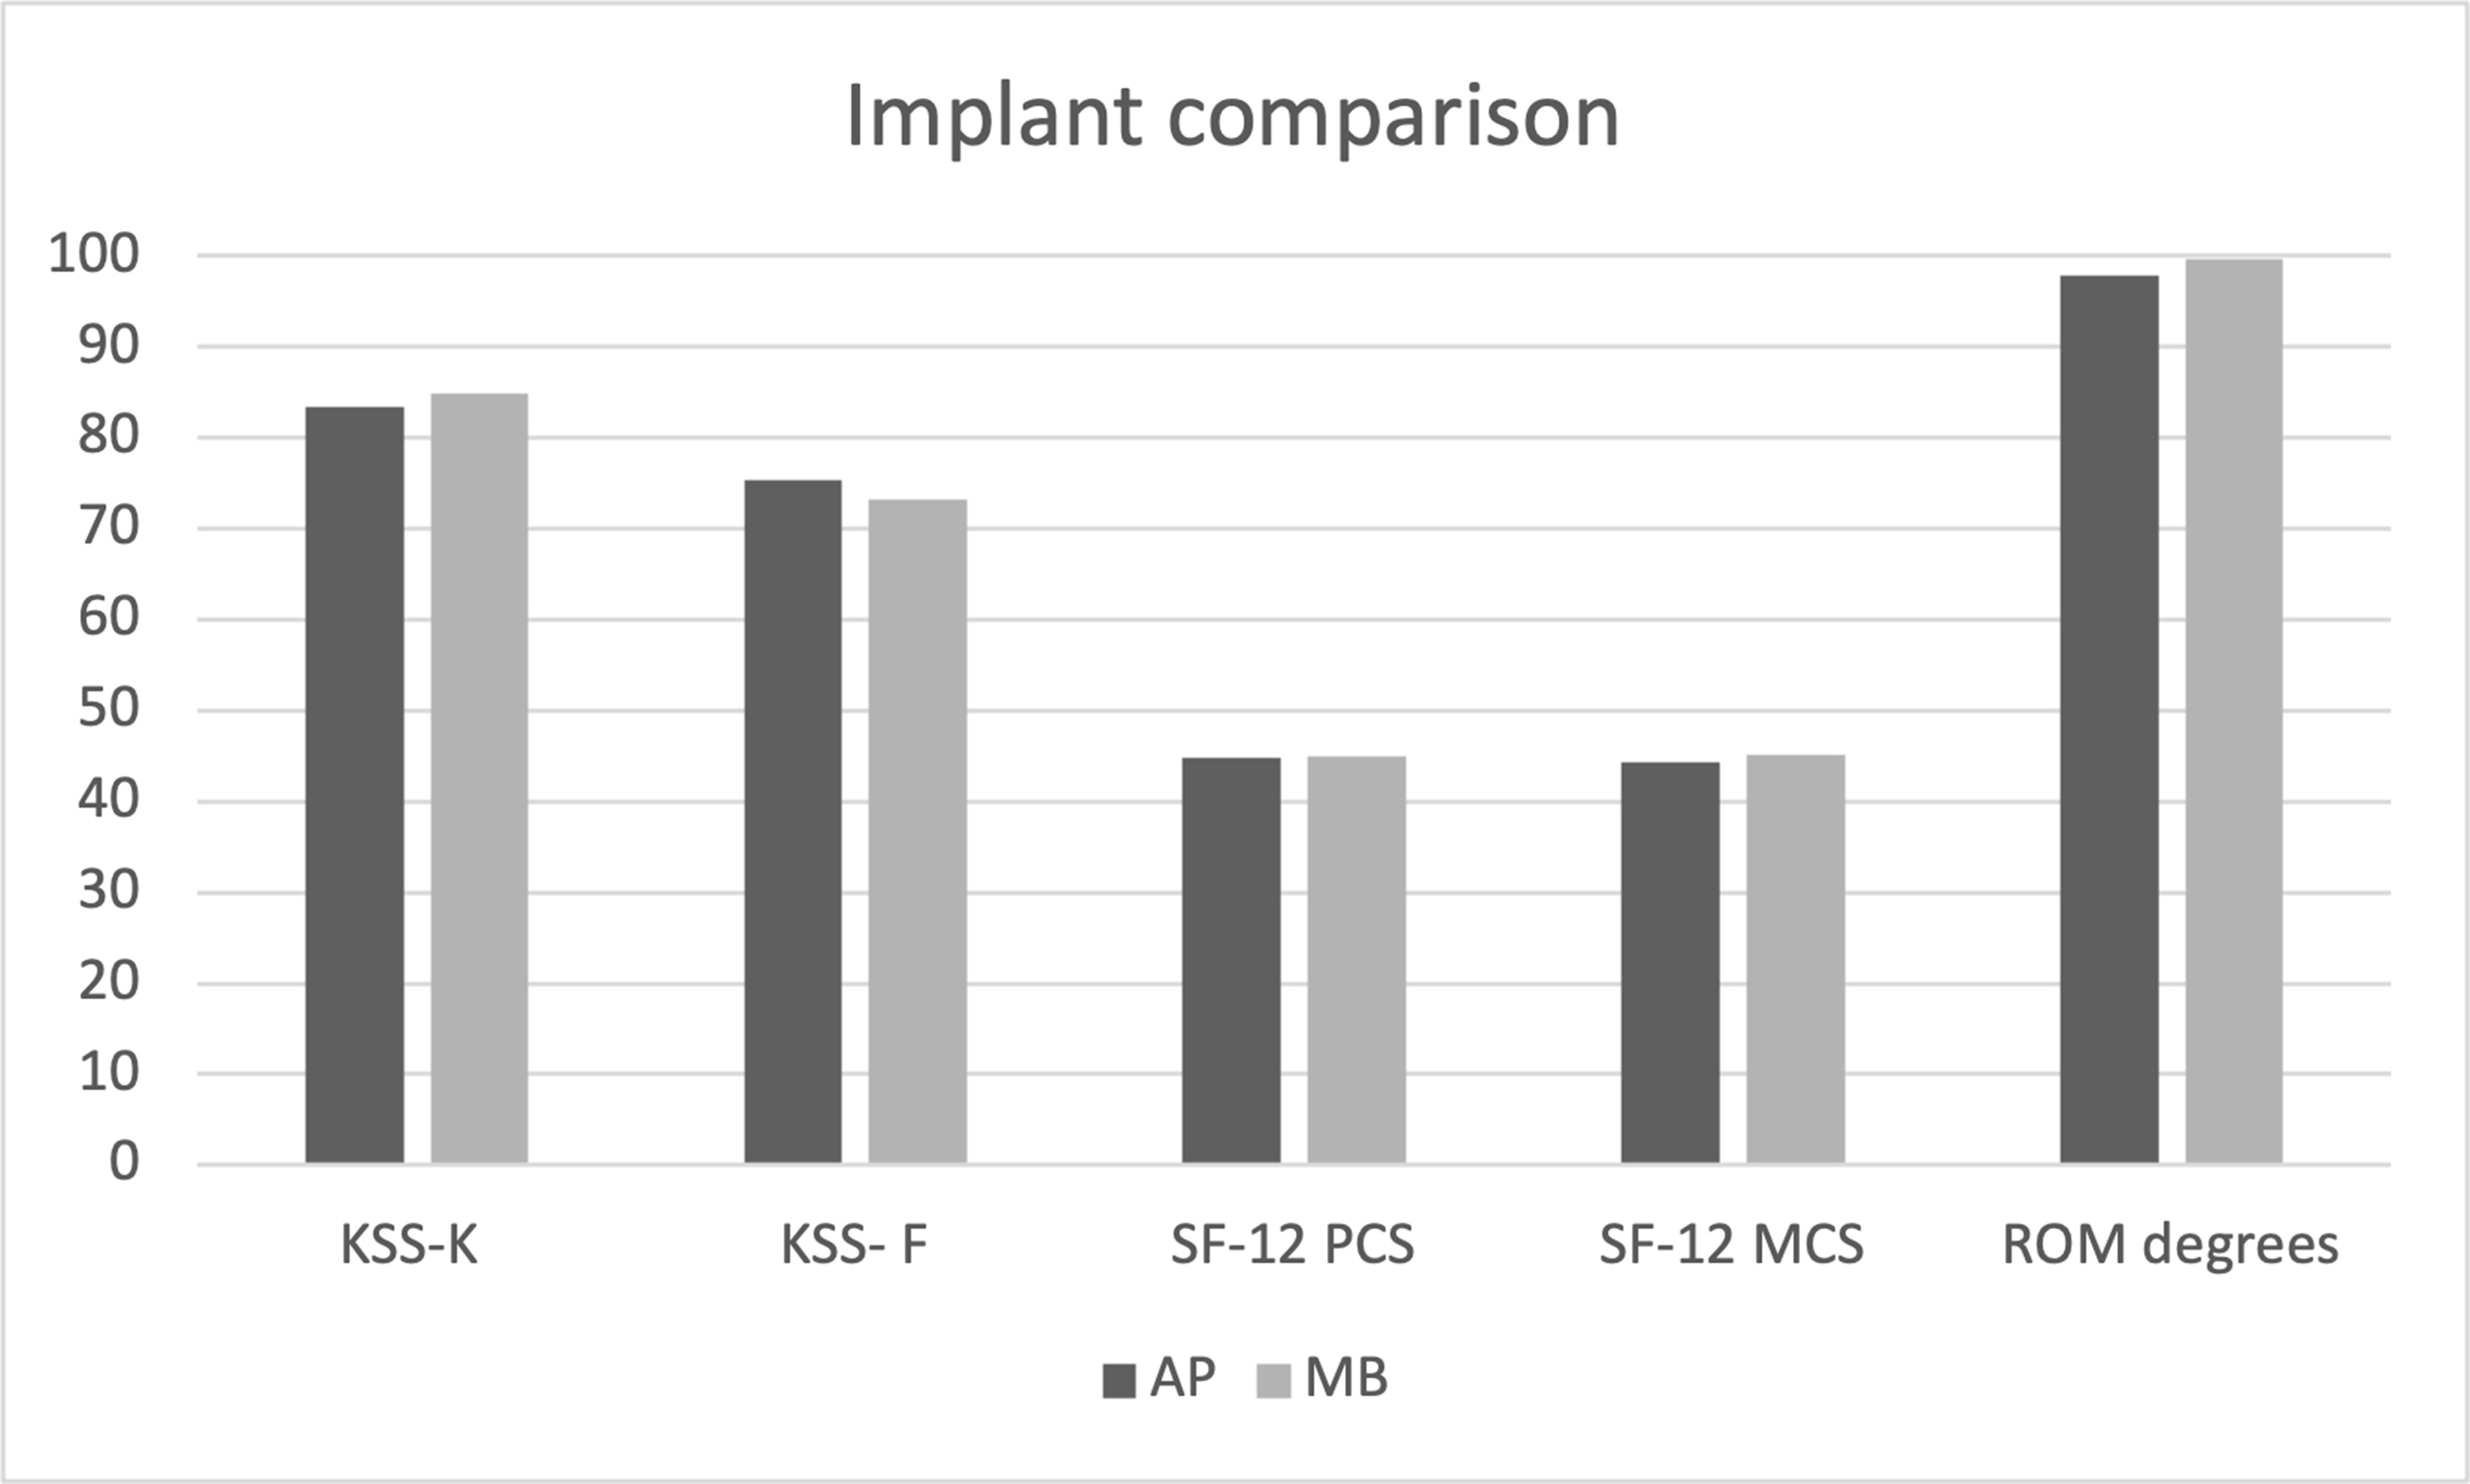 Fig. 2 
            Implant comparison. AP, all-polyethylene; KSS-F, general functional Knee Society Score; KSS-K, knee-specific Knee Society Score; MB, metal-backed; MCS, mental component score; PCS, physical component score; ROM, range of motion; SF-12, 12-item Short-Form Health Survey questionnaire.
          